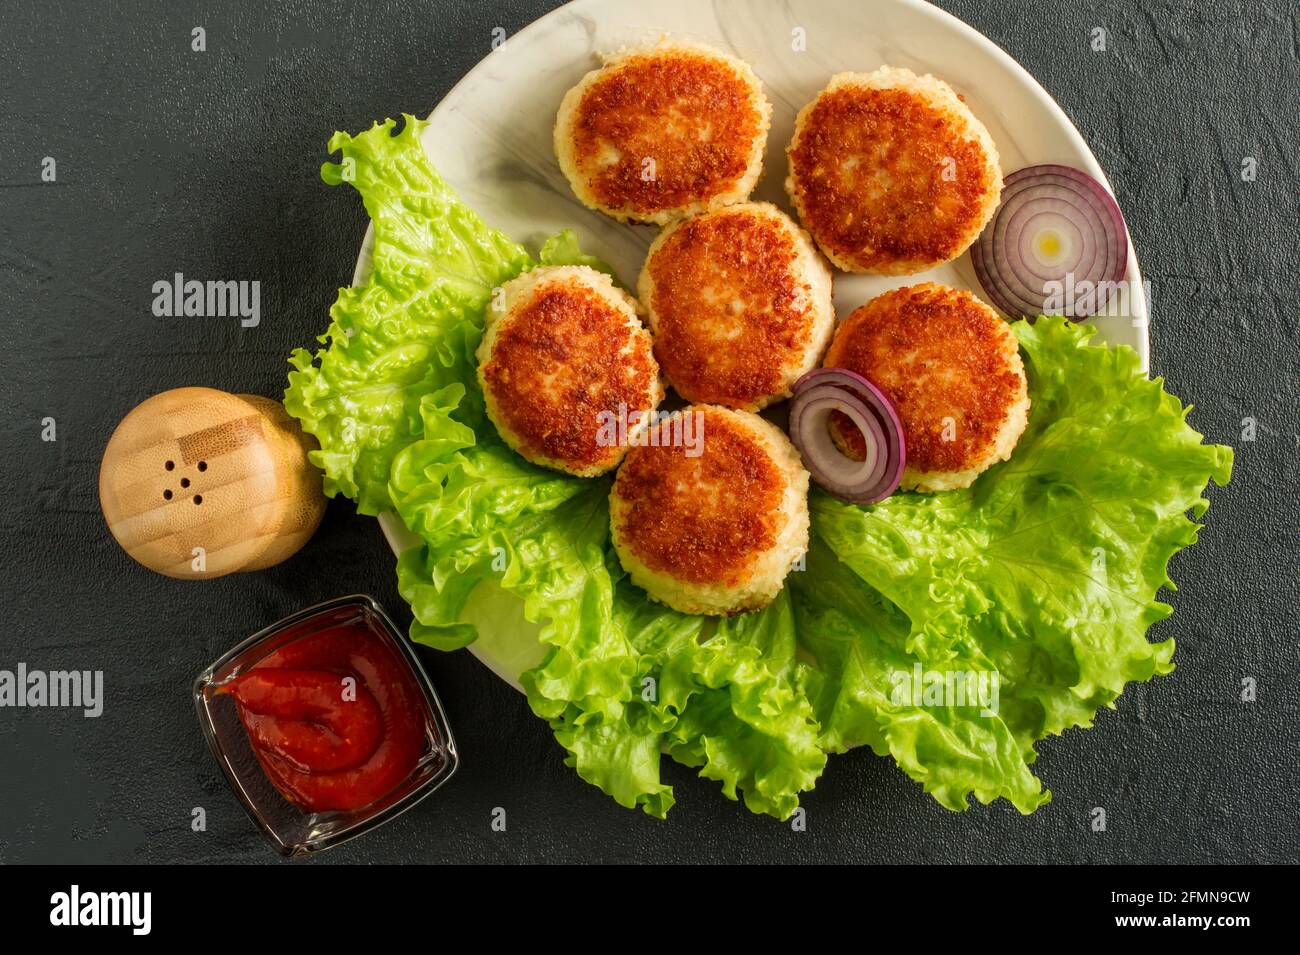 juicy delicious coated with breadcrumbs and fried chicken cutlets on white plate with spices and cetchup on dark background, view from above. Stock Photo